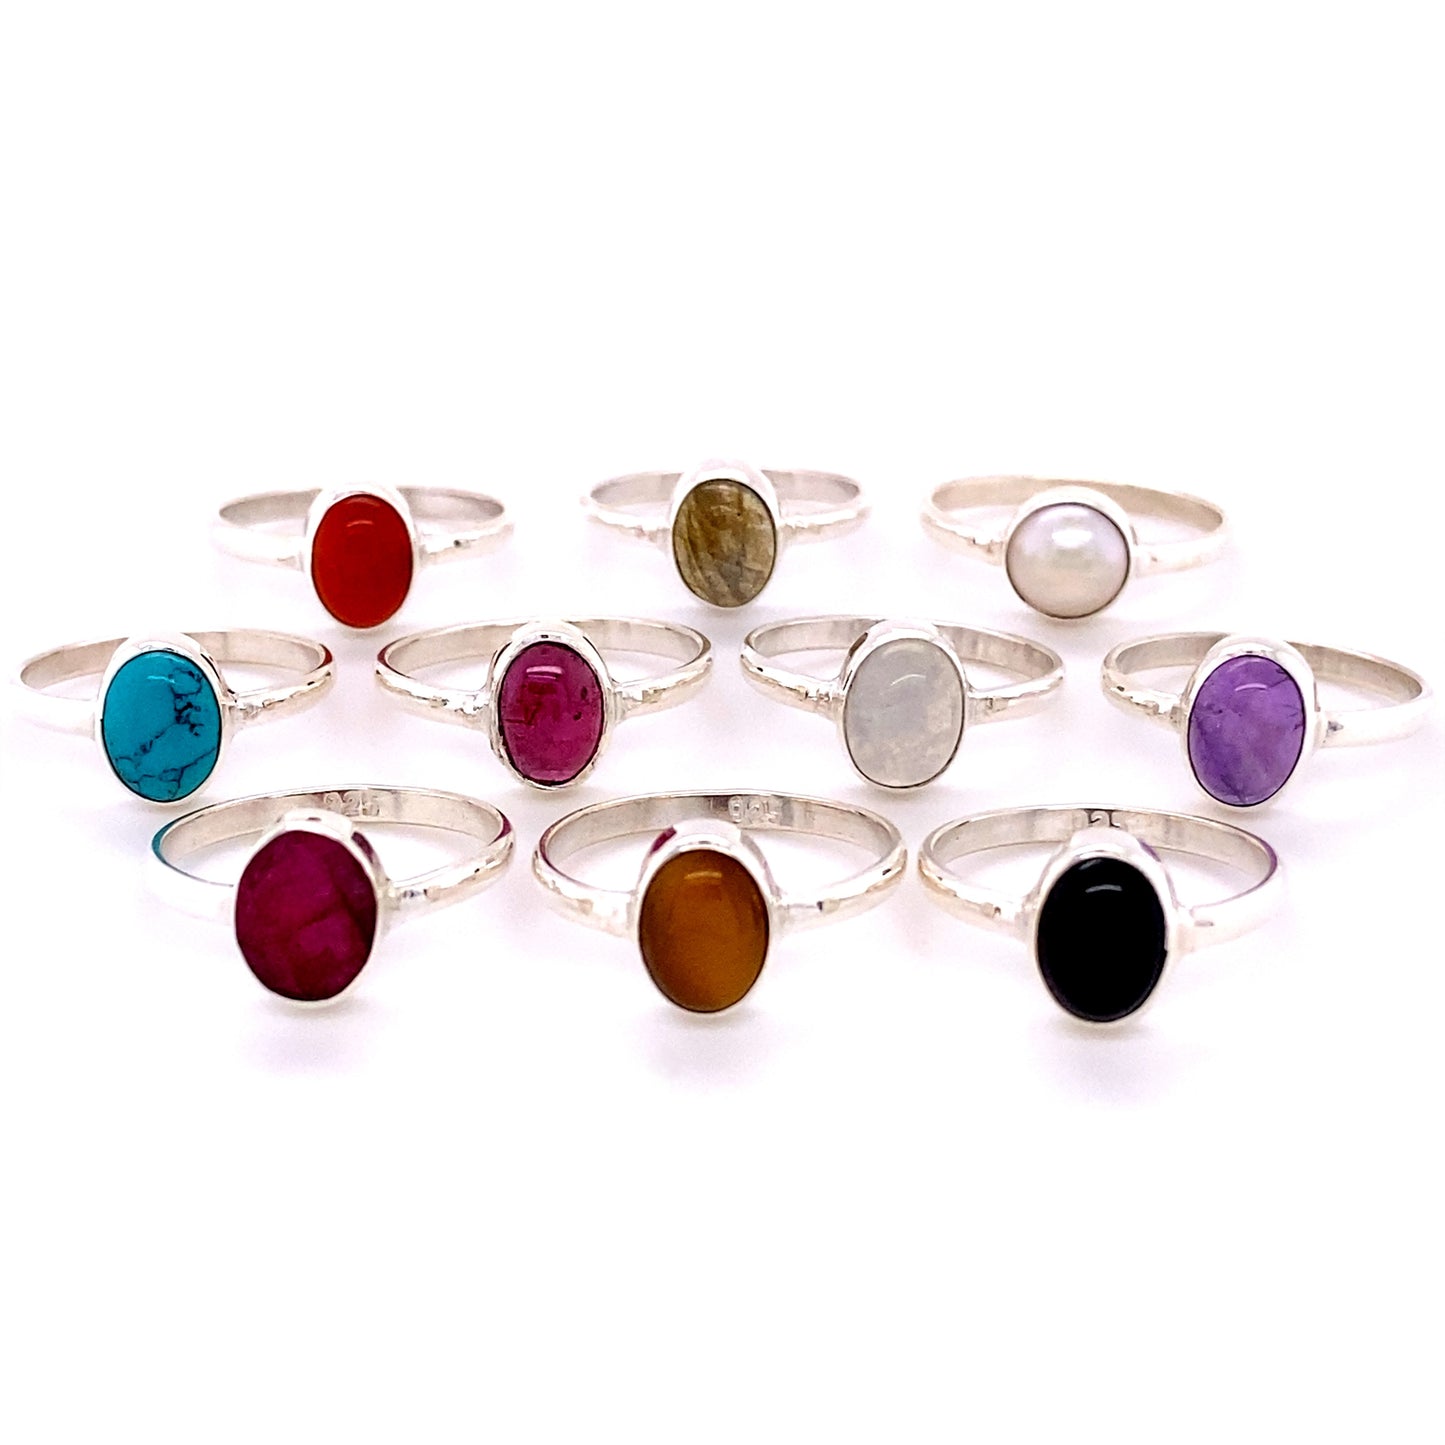 A collection of Simple Oval Natural Gemstone Rings with various colored oval gemstones displayed on a white background.